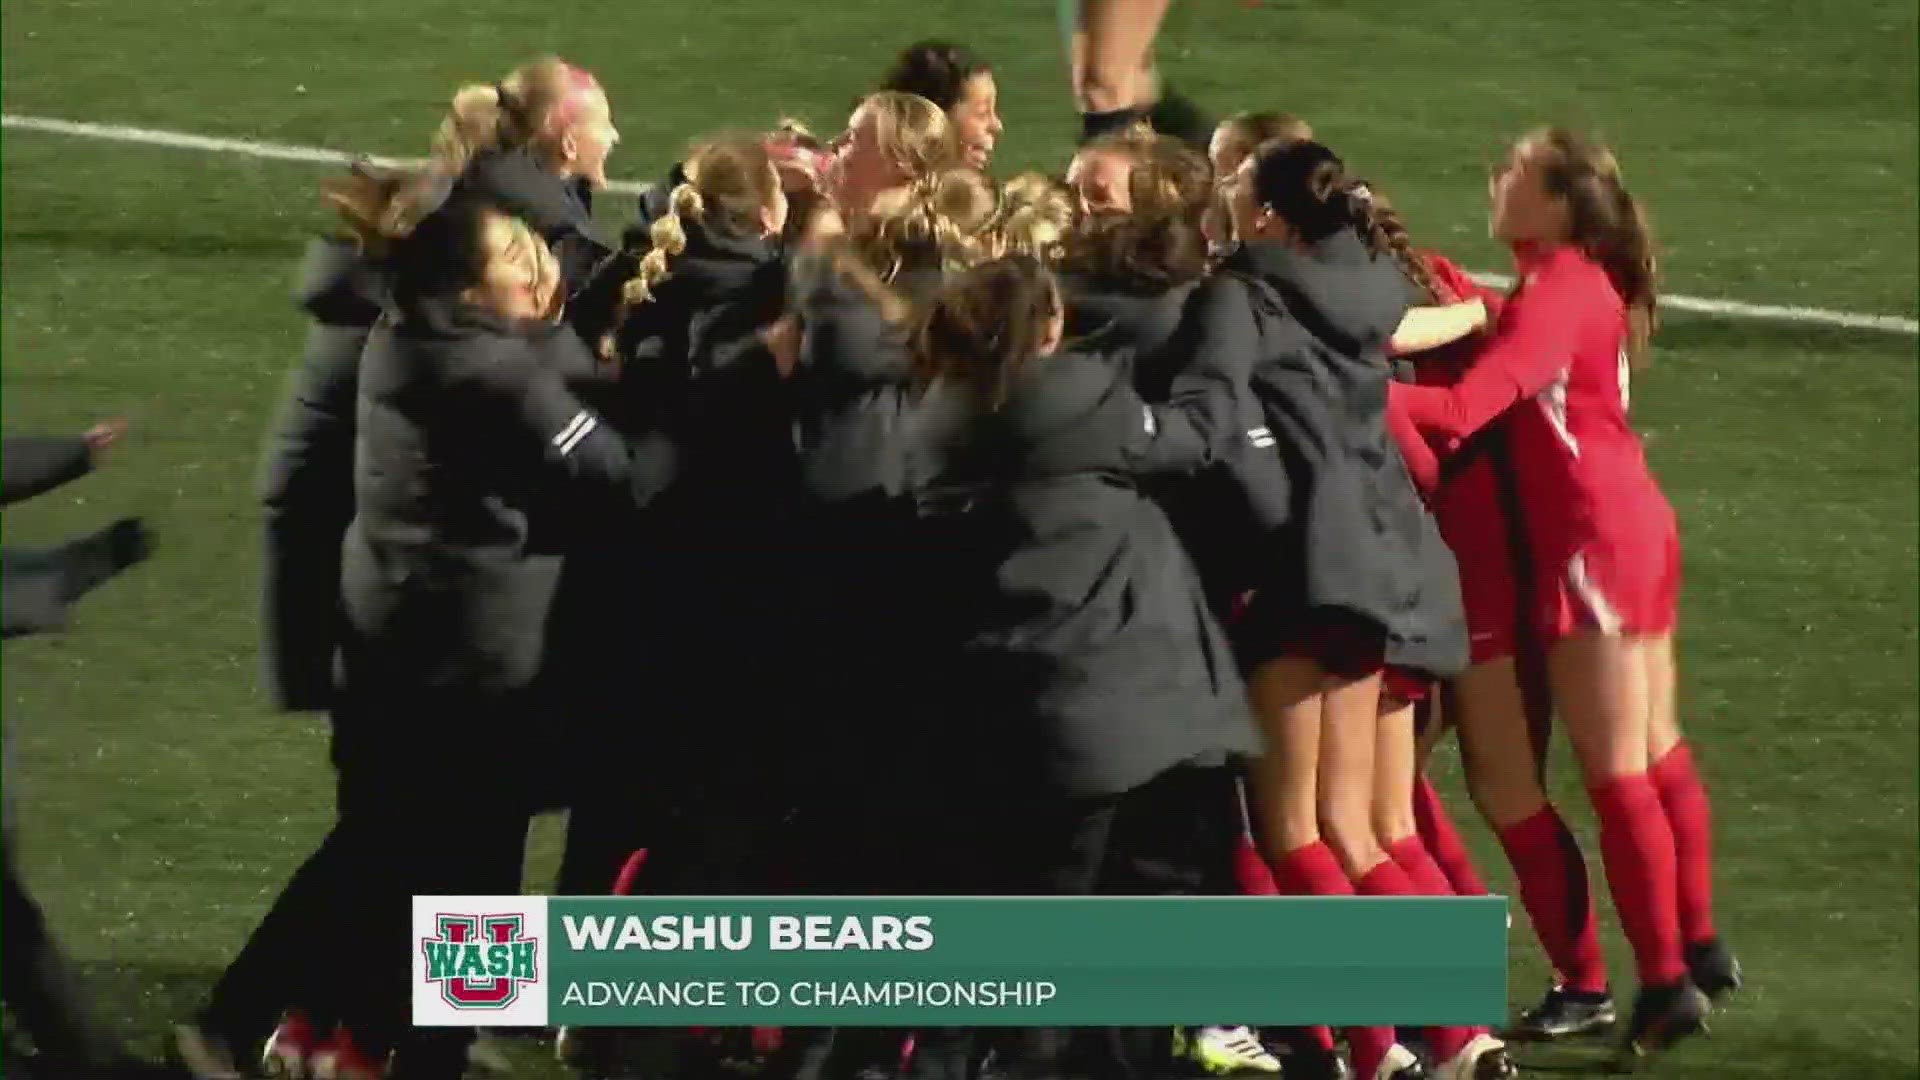 The Washington University women's soccer team advanced to the National Championship Game. The Bears will face California Lutheran on Saturday.